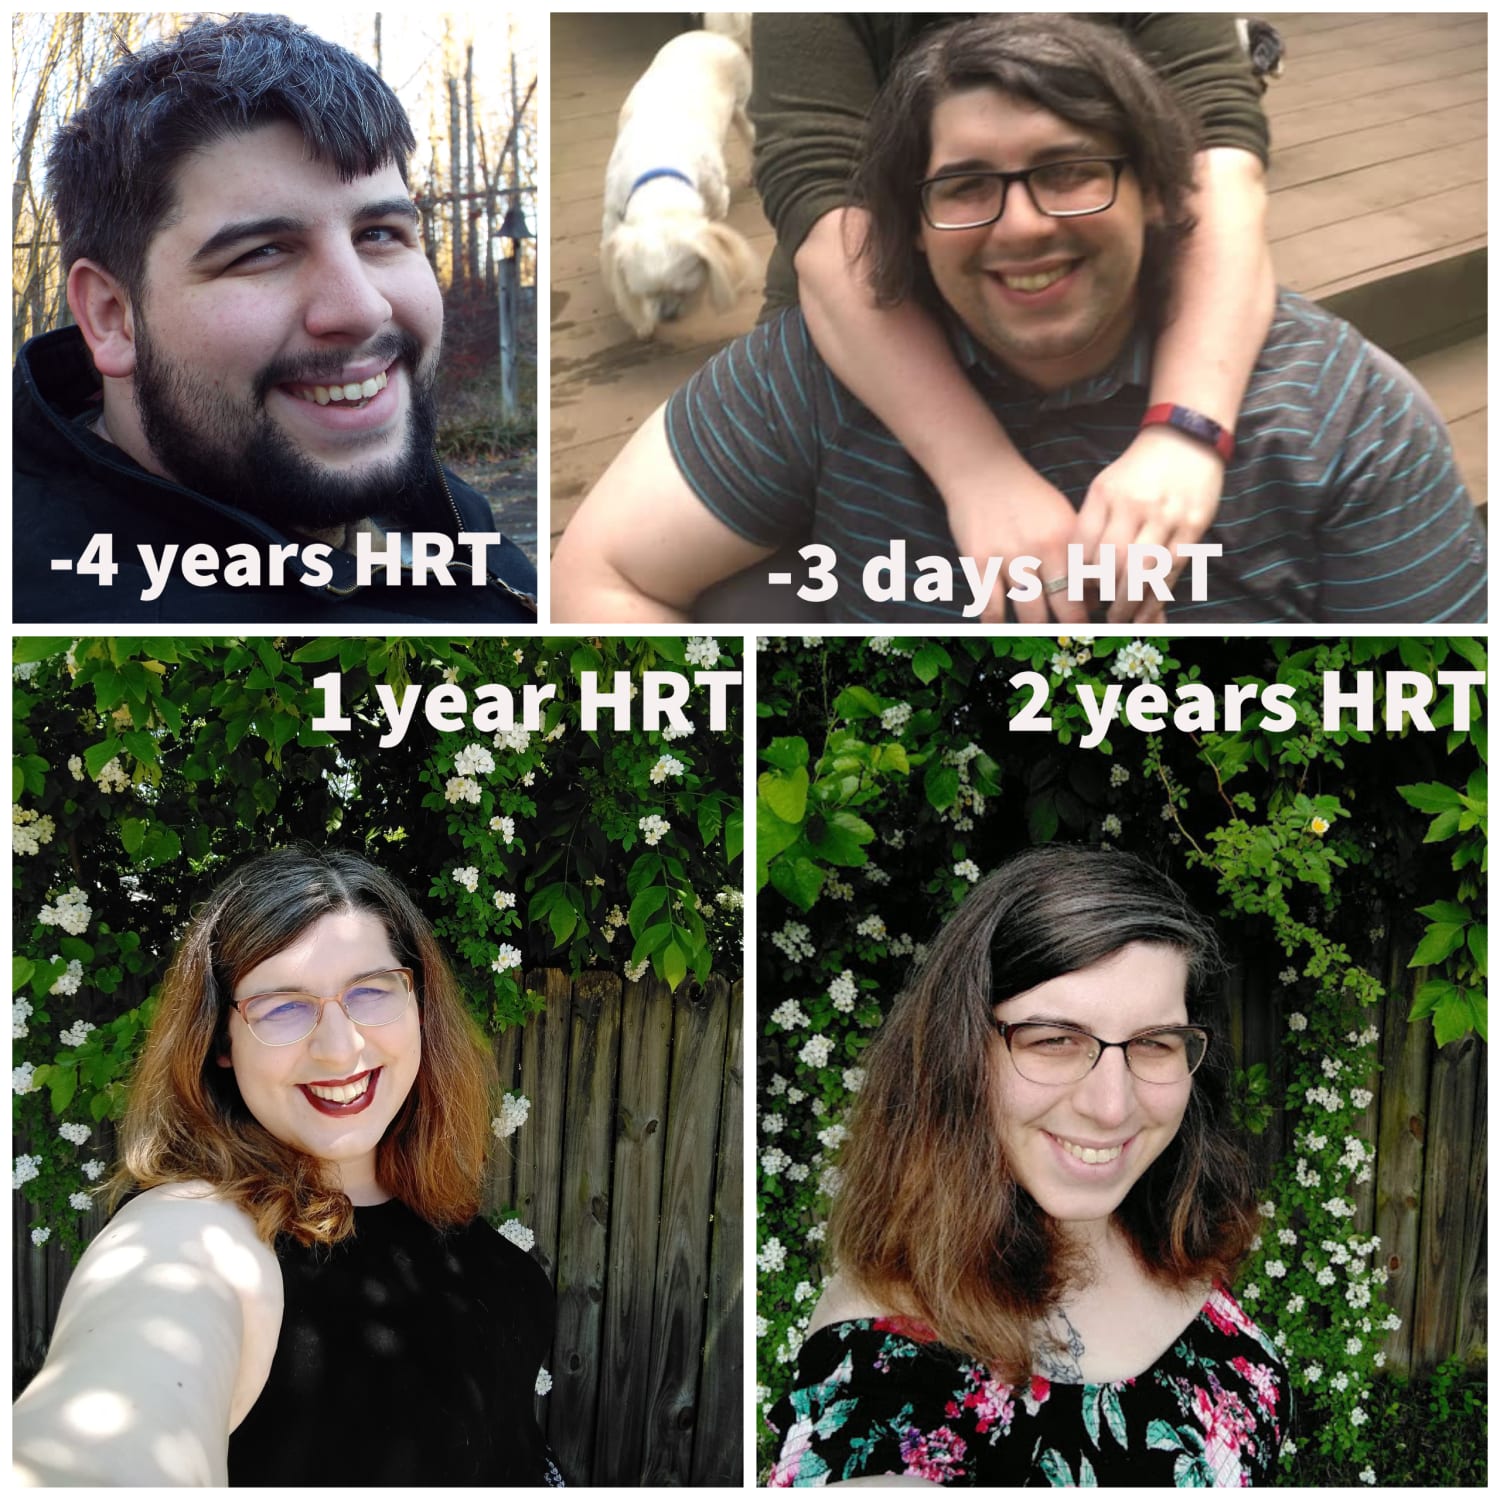 Been shapeshifting 2 years to the day. (2 years HRT + 100 lbs lost. 31 MtF)